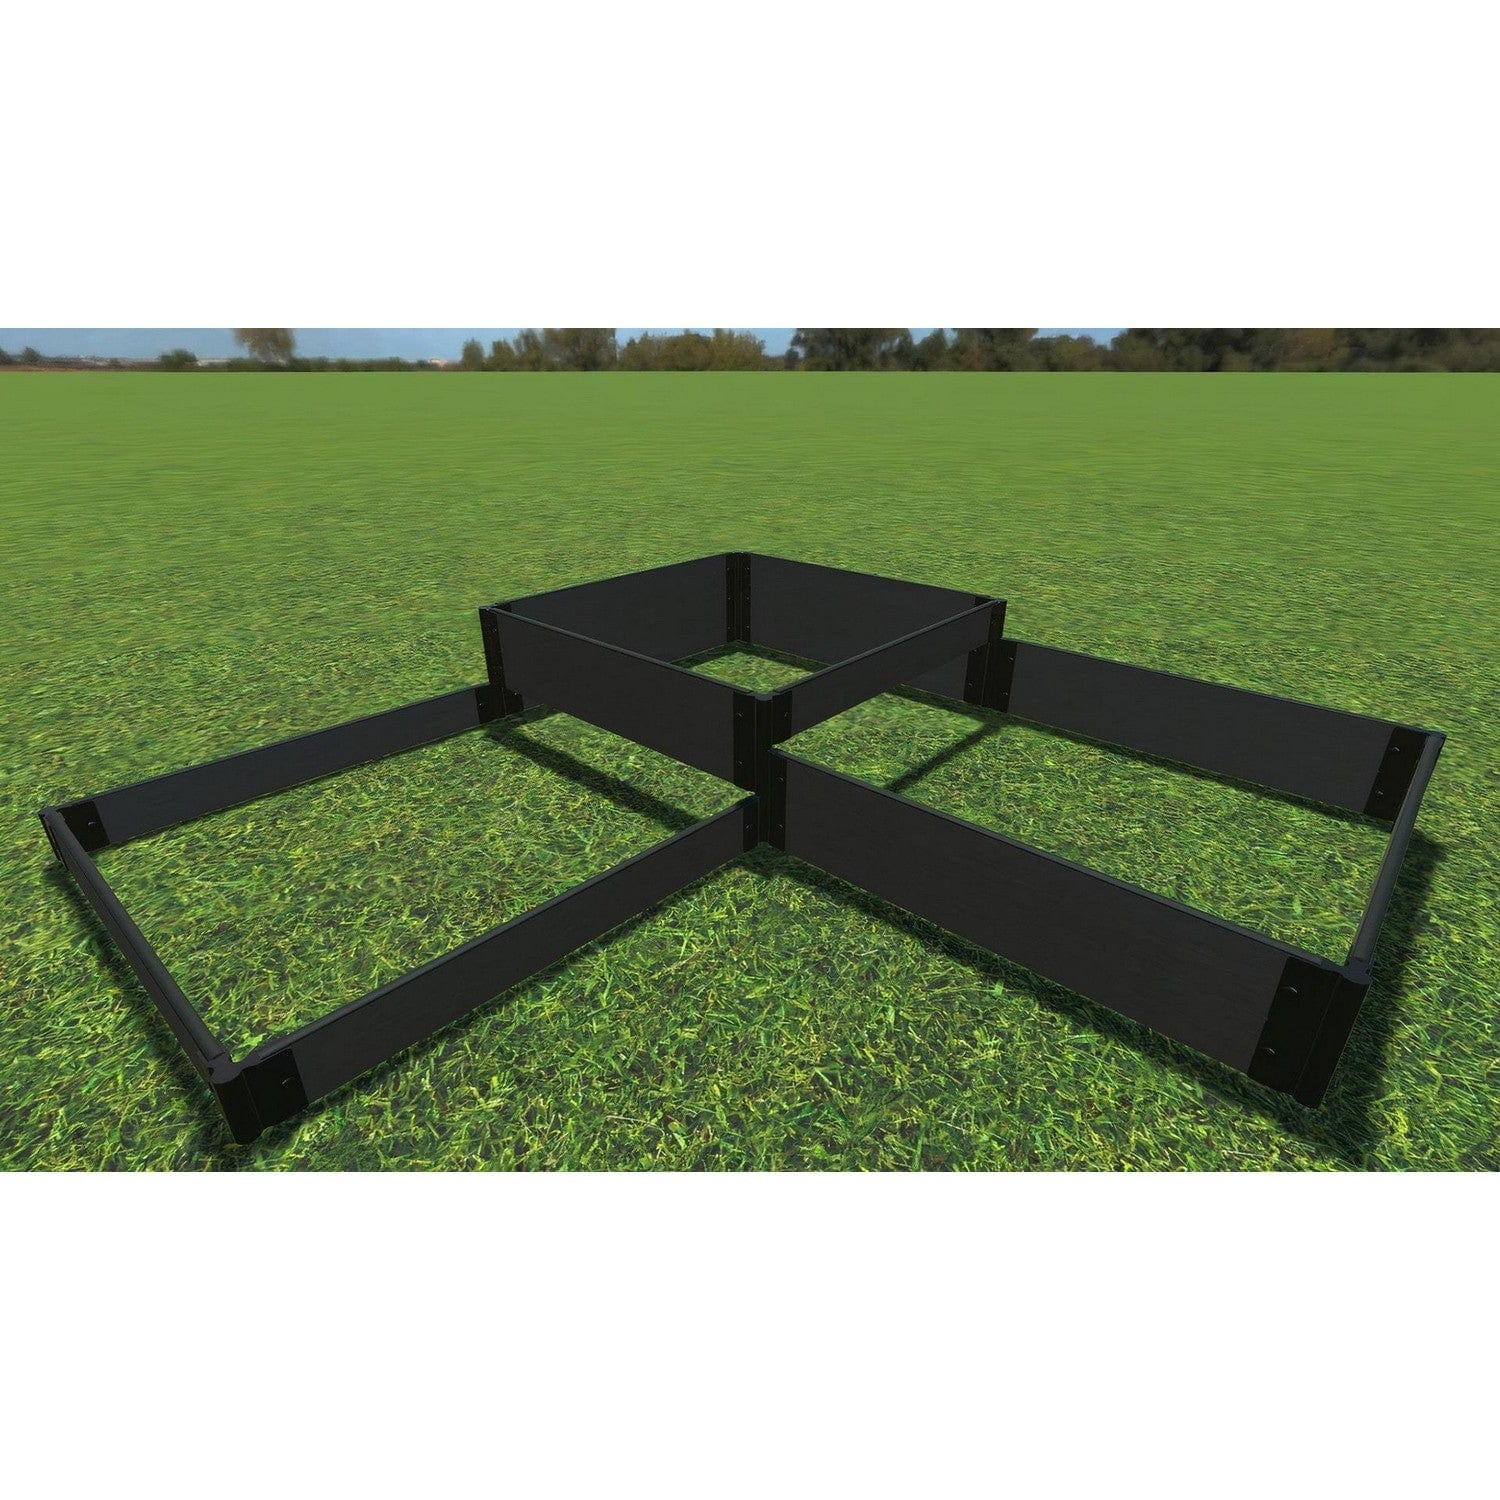 Frame It All Gardening Accessories Frame It All | Tool-Free Fort Knox Straight Corner Raised Garden Bed (Tri-Level) 8' X 8' X 16.5" - Weathered Wood - 1" Profile 800001022